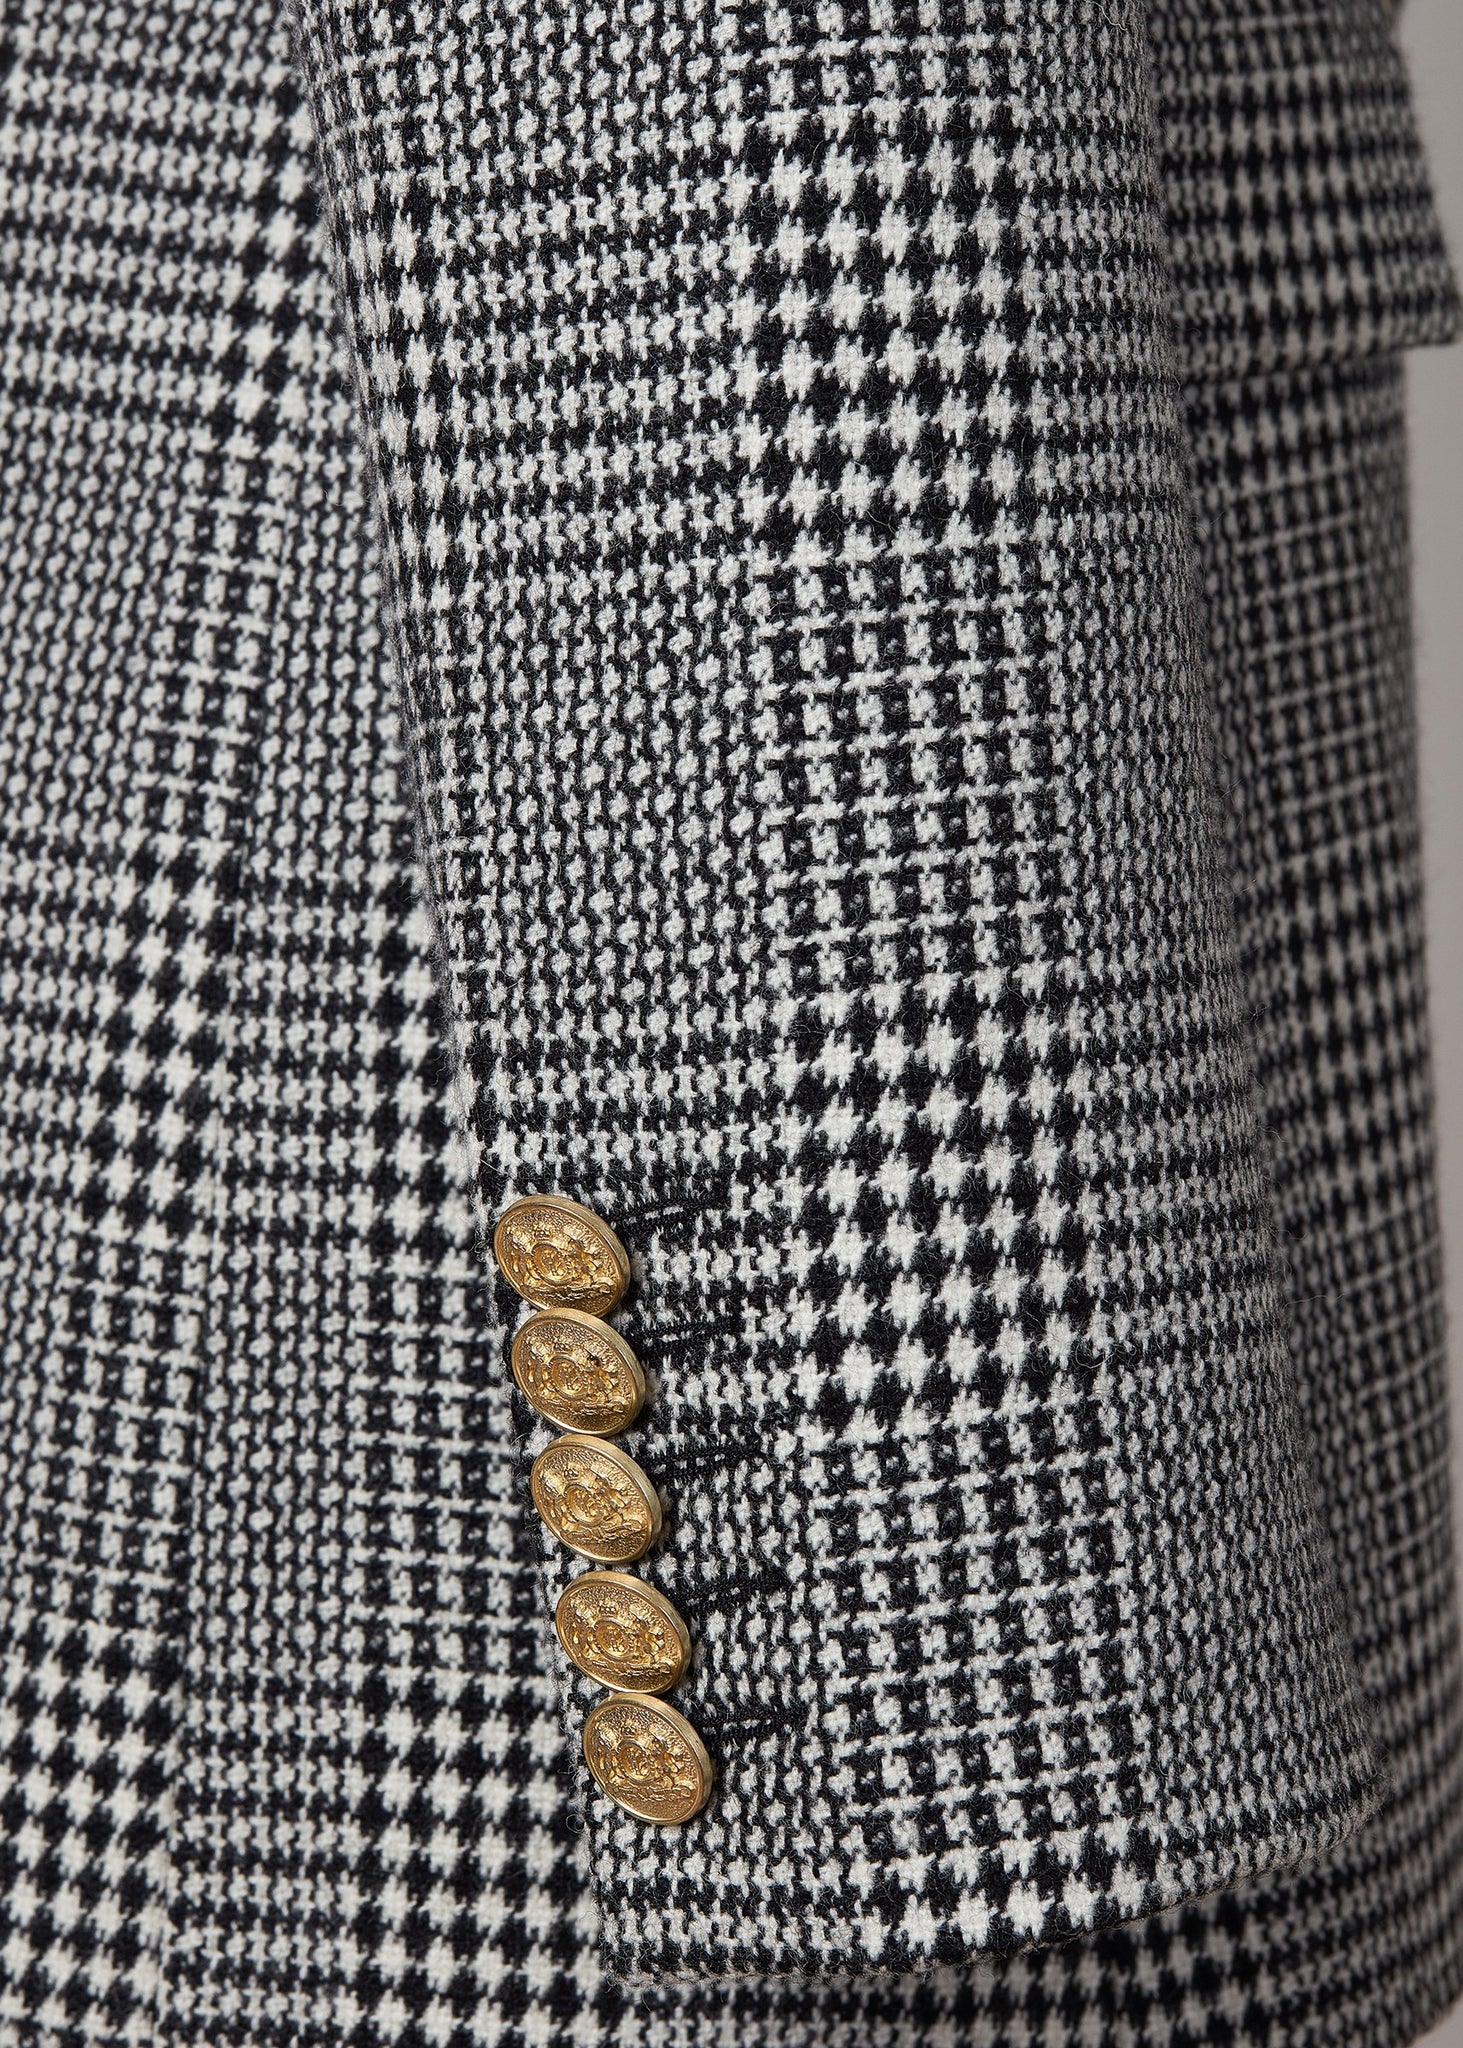 gold button detail on cuffs of double breasted wool blazer in black and white check with two hip pockets and gold button details down front and on cuffs and handmade in the uk